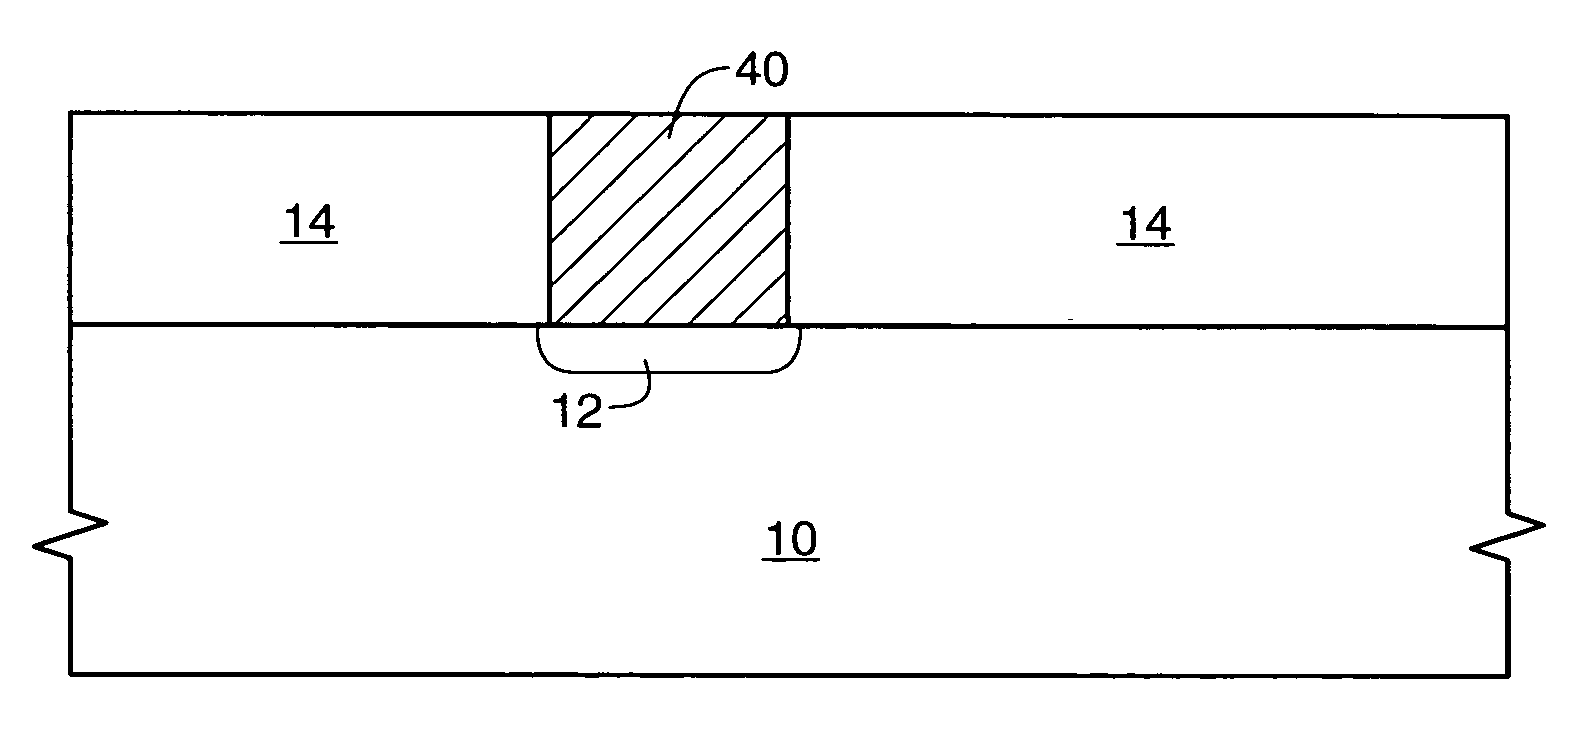 Nucleation method for atomic layer deposition of cobalt on bare silicon during the formation of a semiconductor device